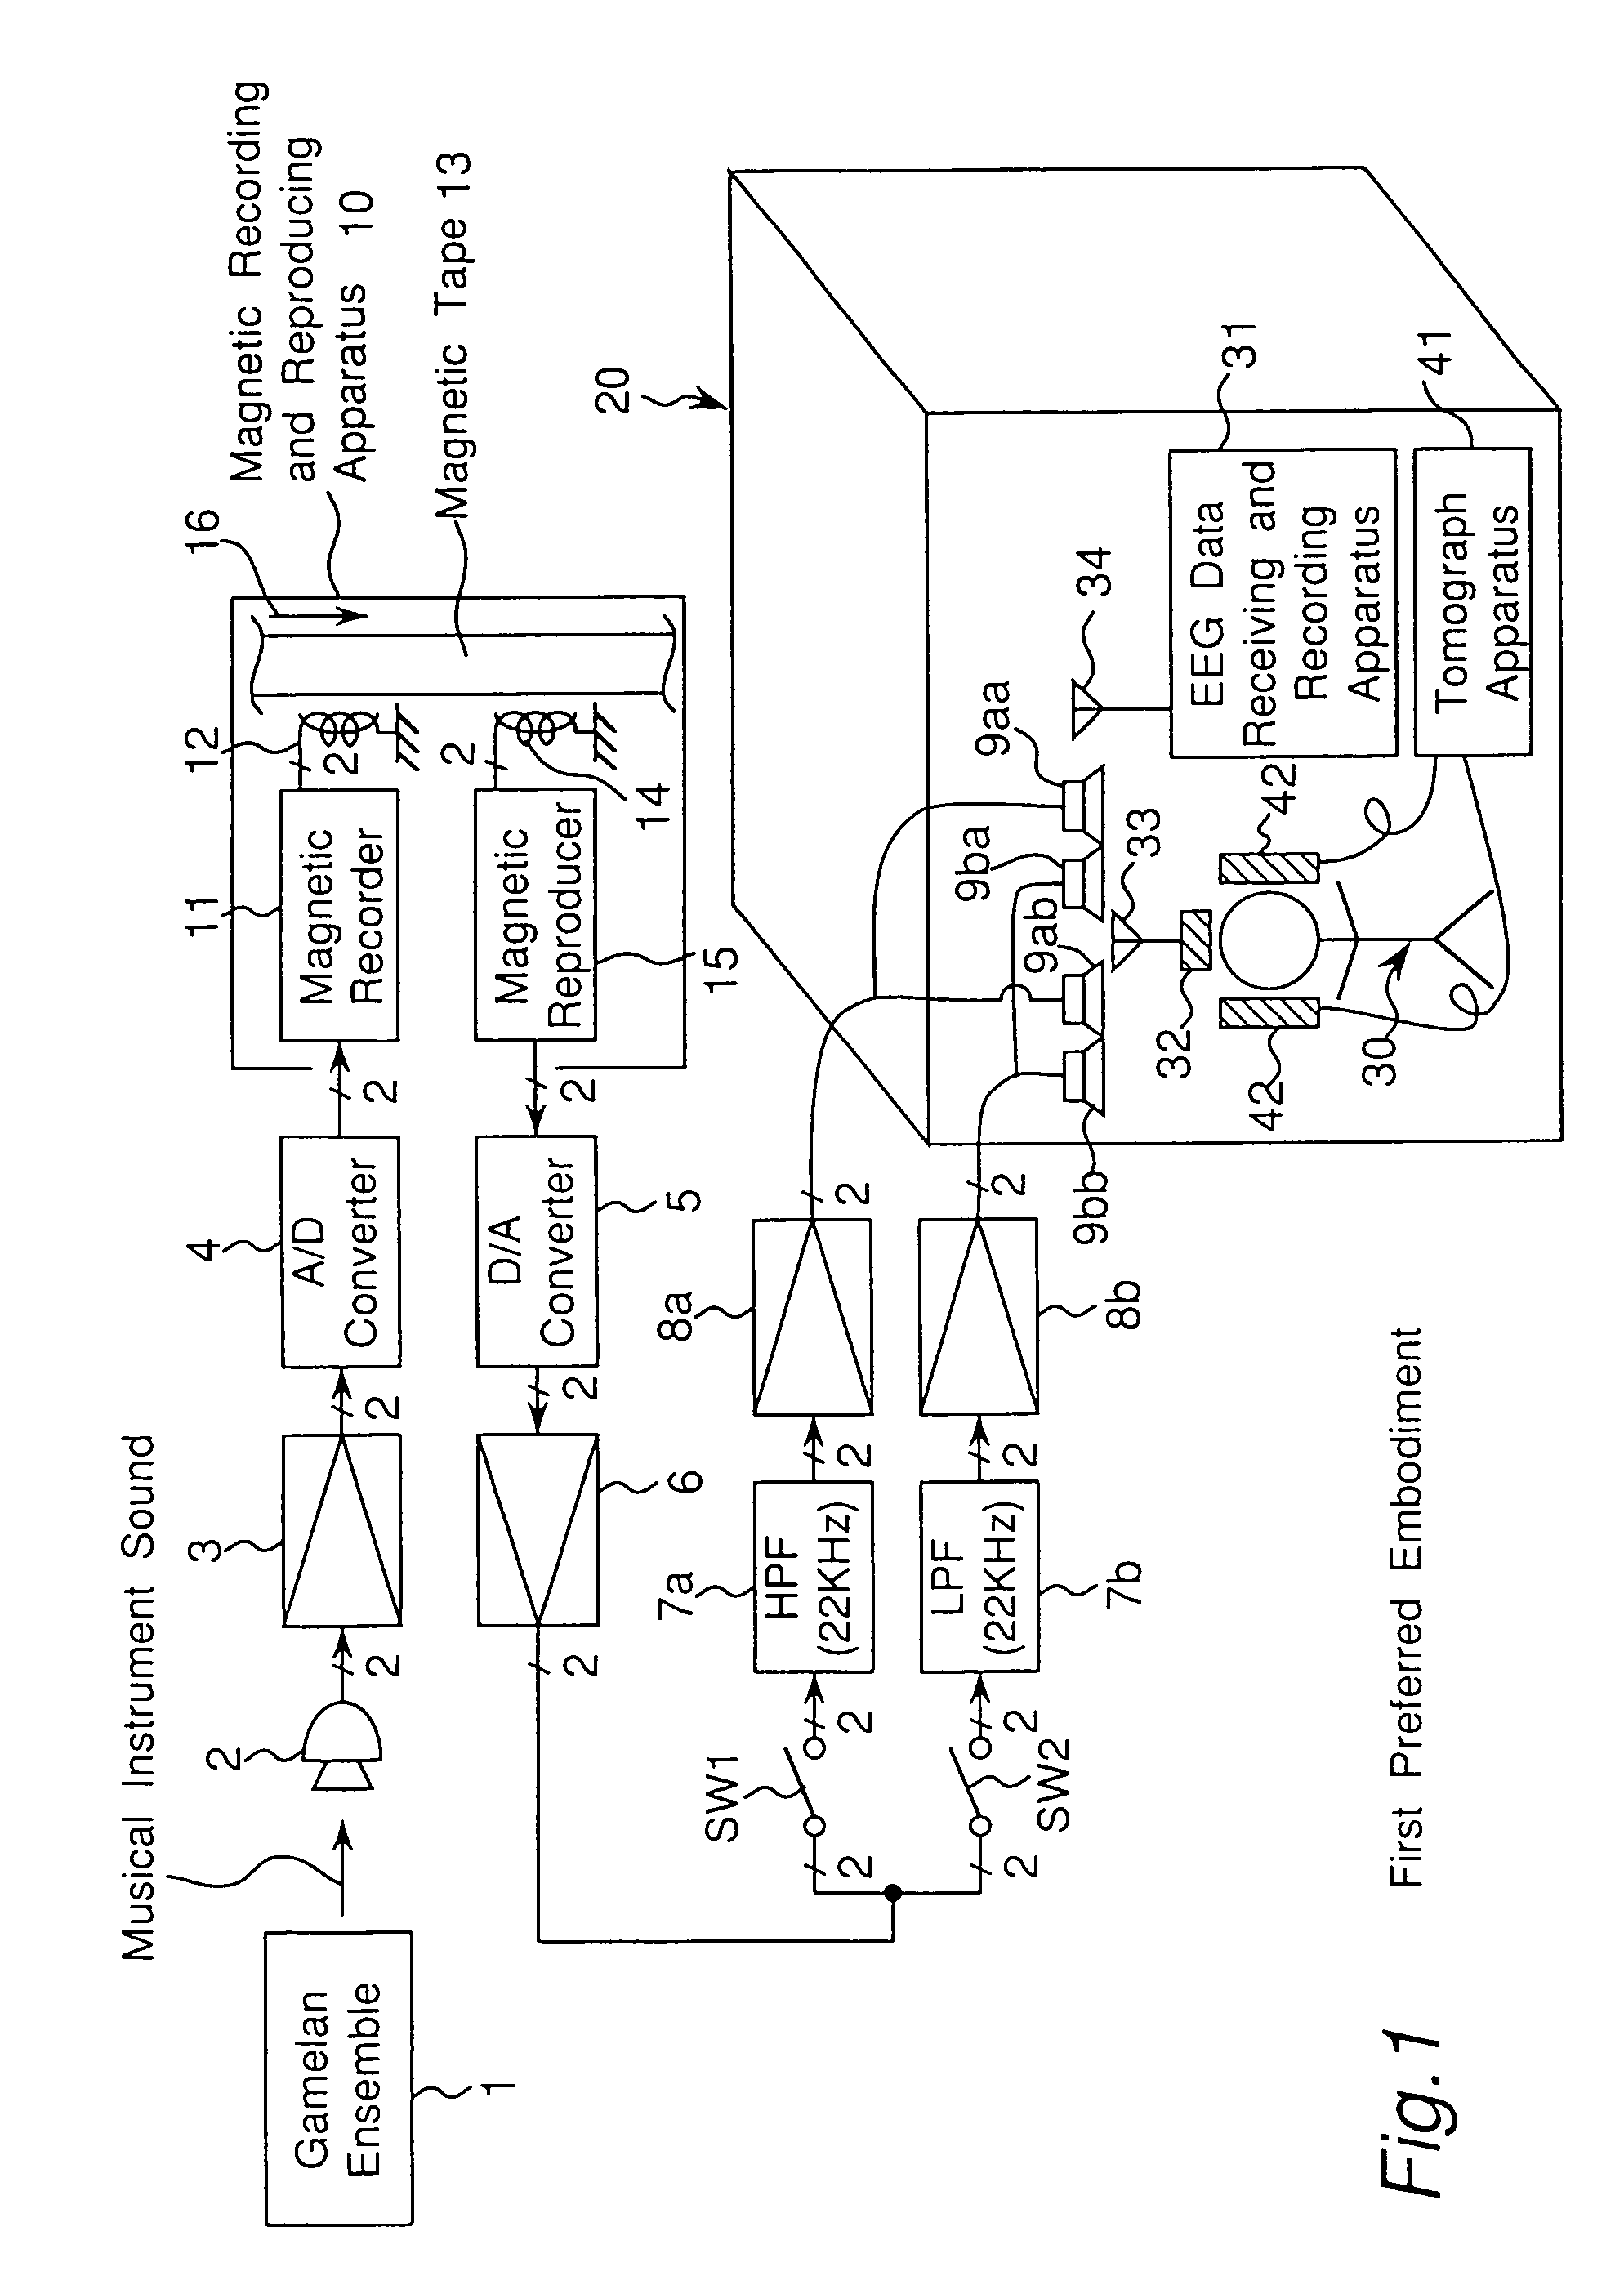 Sound generating apparatus and method, sound generating space and sound, each provided for significantly increasing cerebral blood flows of persons